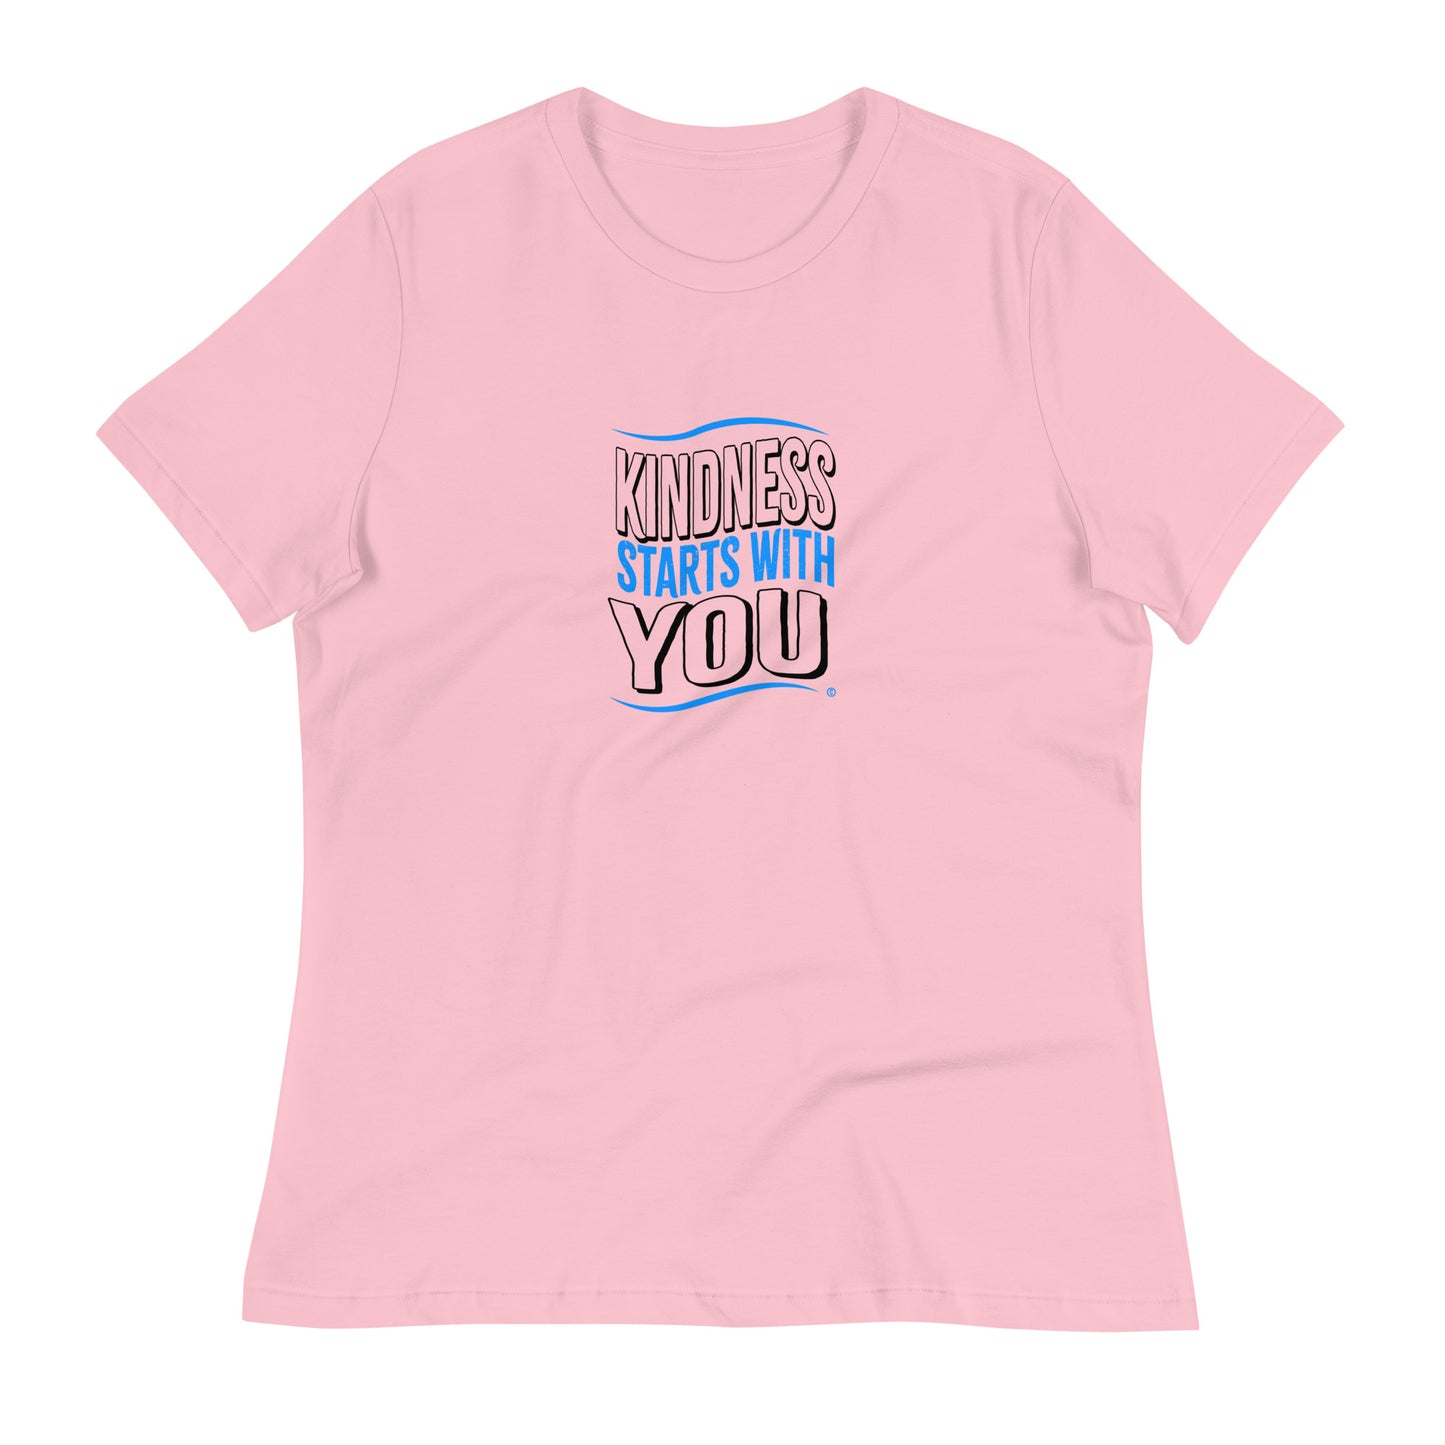 Kindness Starts with You Women's Tees